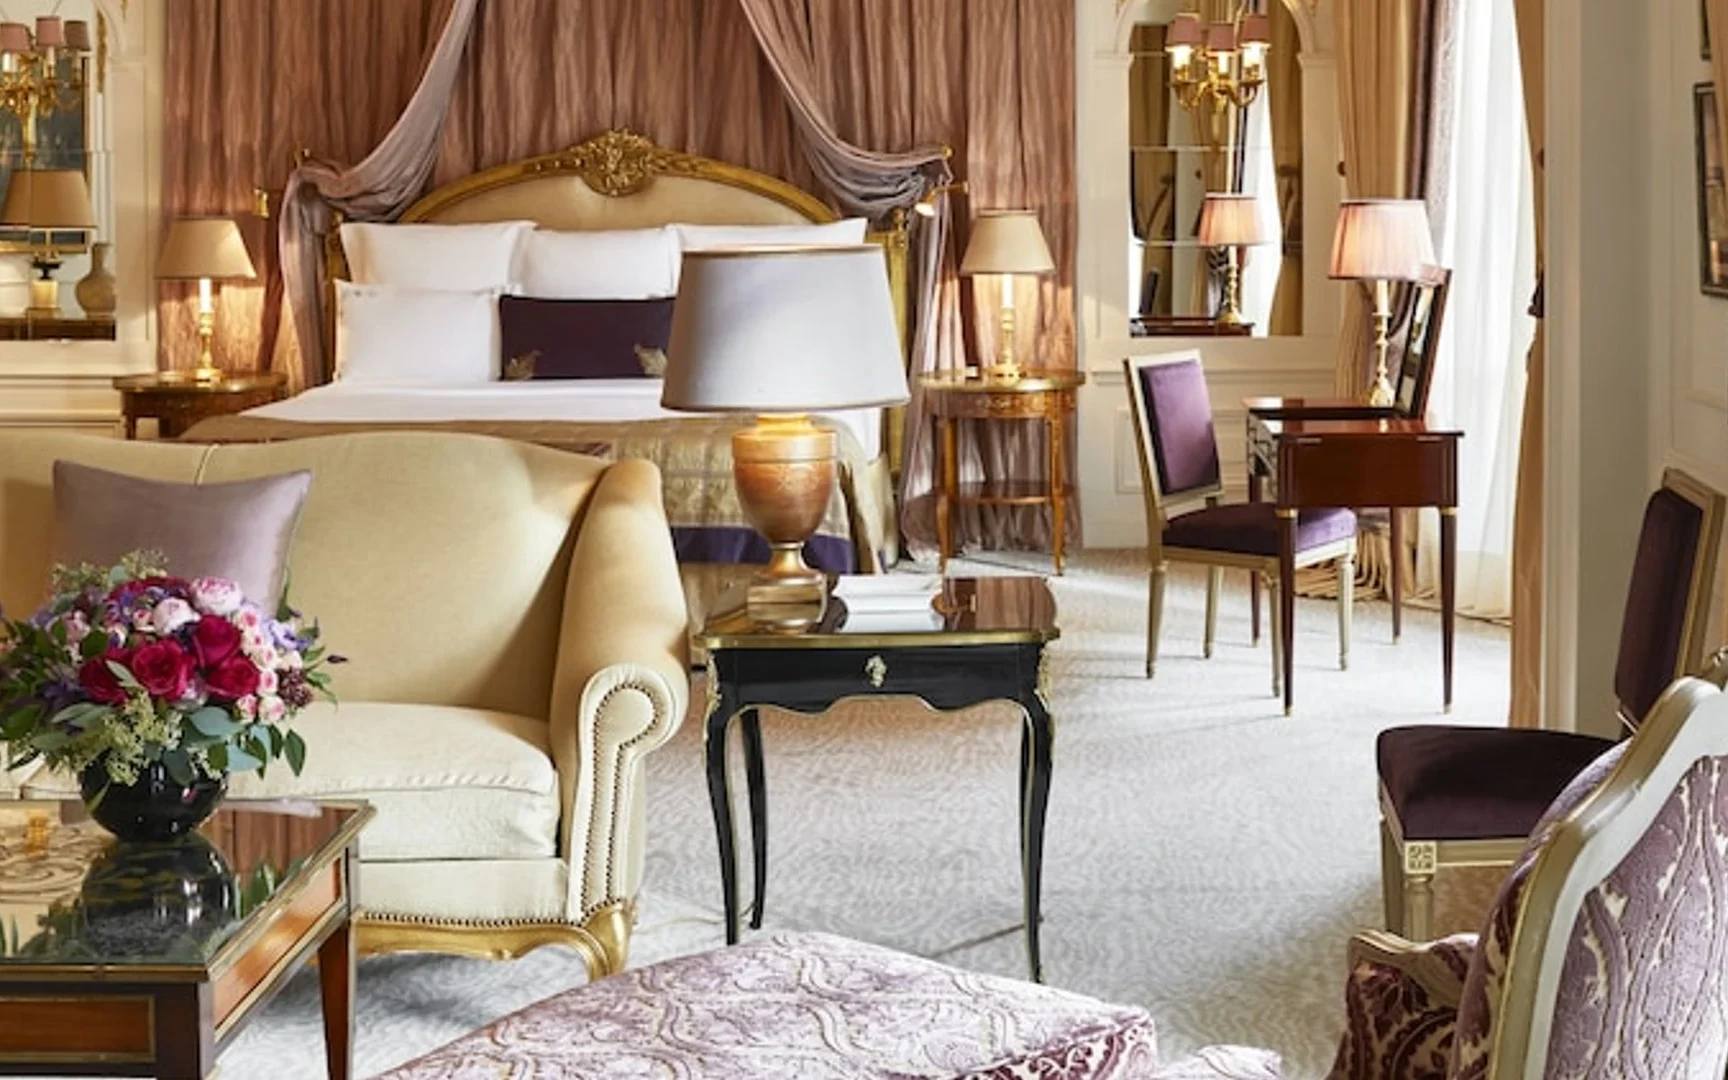 The Royal Suire at Hotel Plaza Athenee Paris is one of the most luxurious hotel rooms in Europe - Luxury Escapes